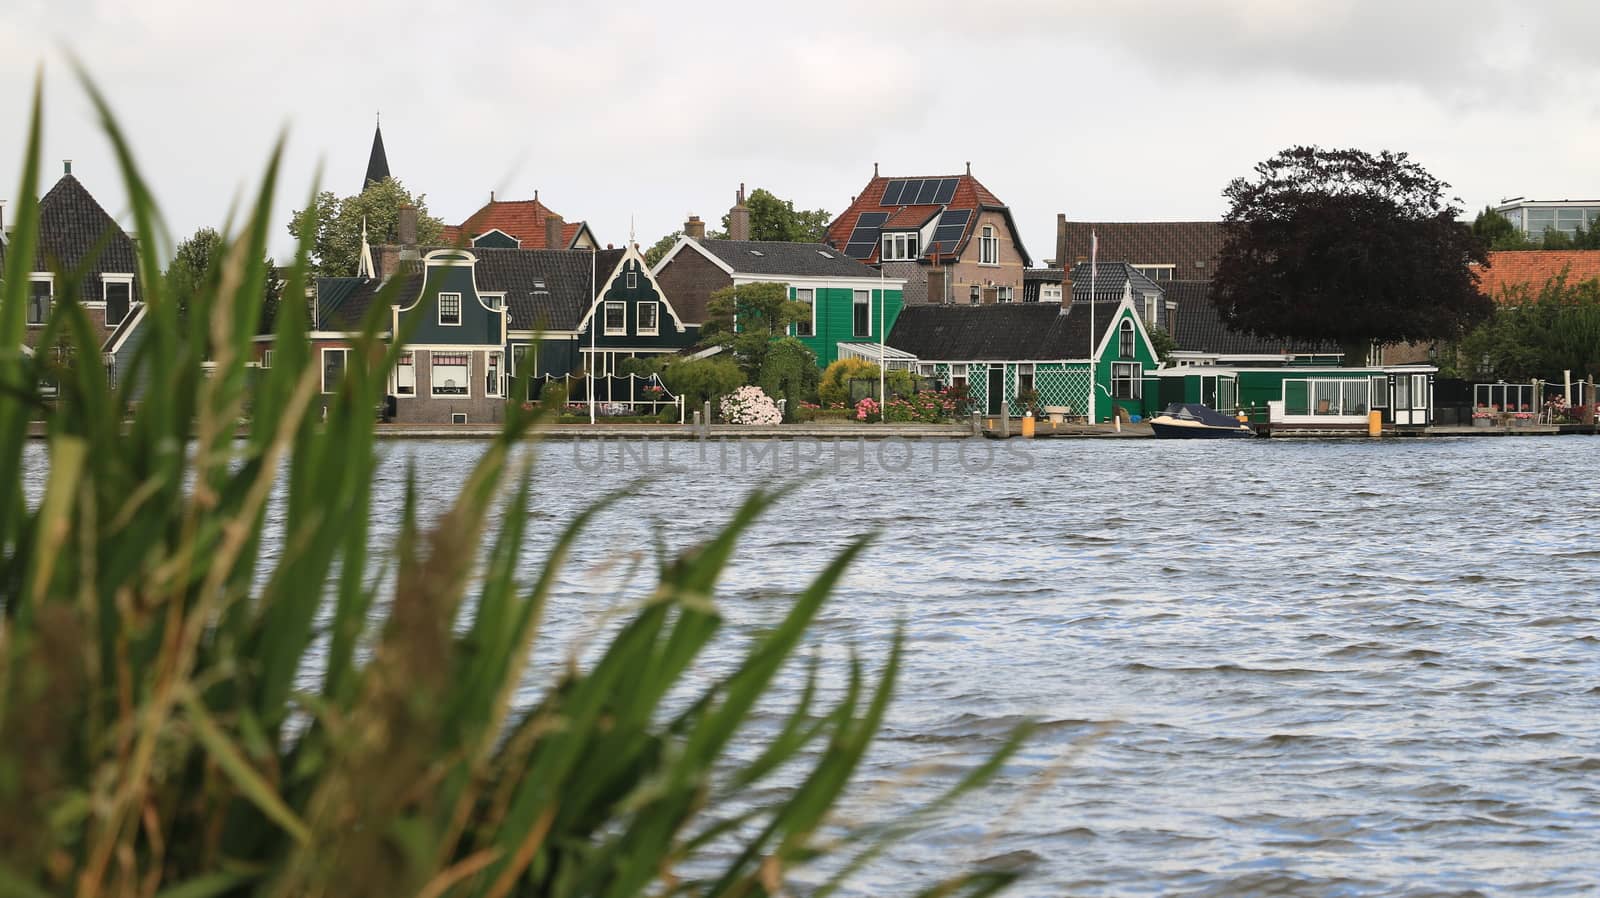 Typical Dutch houses on the canal near Amsterdam. In the land of windmills there are many traditional houses along the river.